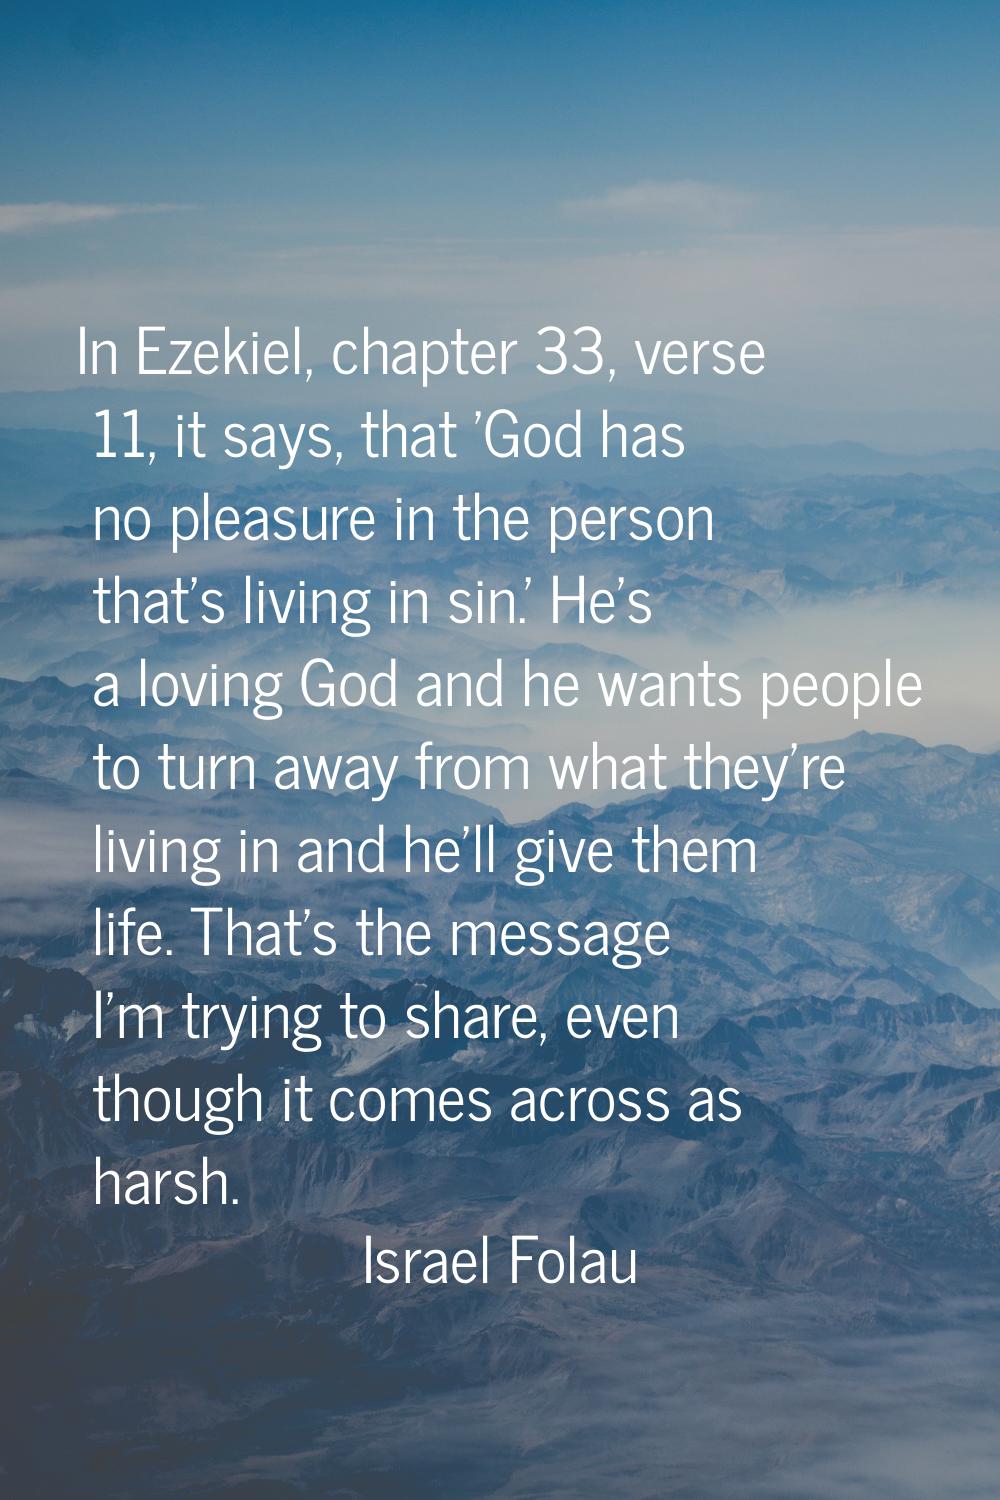 In Ezekiel, chapter 33, verse 11, it says, that 'God has no pleasure in the person that's living in